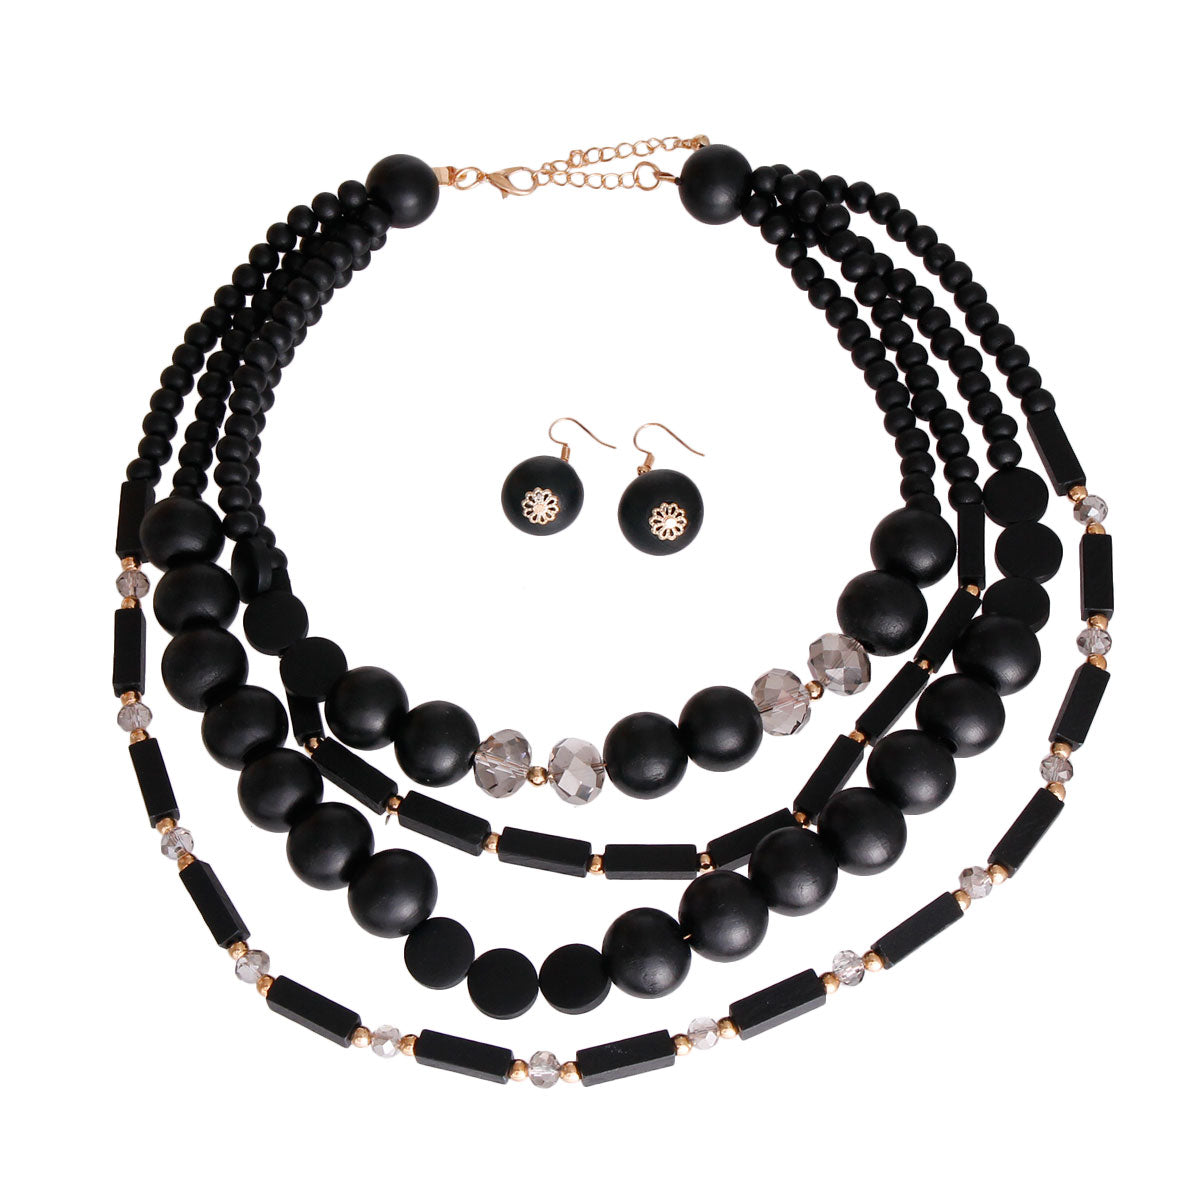 Black Wooden Bead 4 Strand Necklace